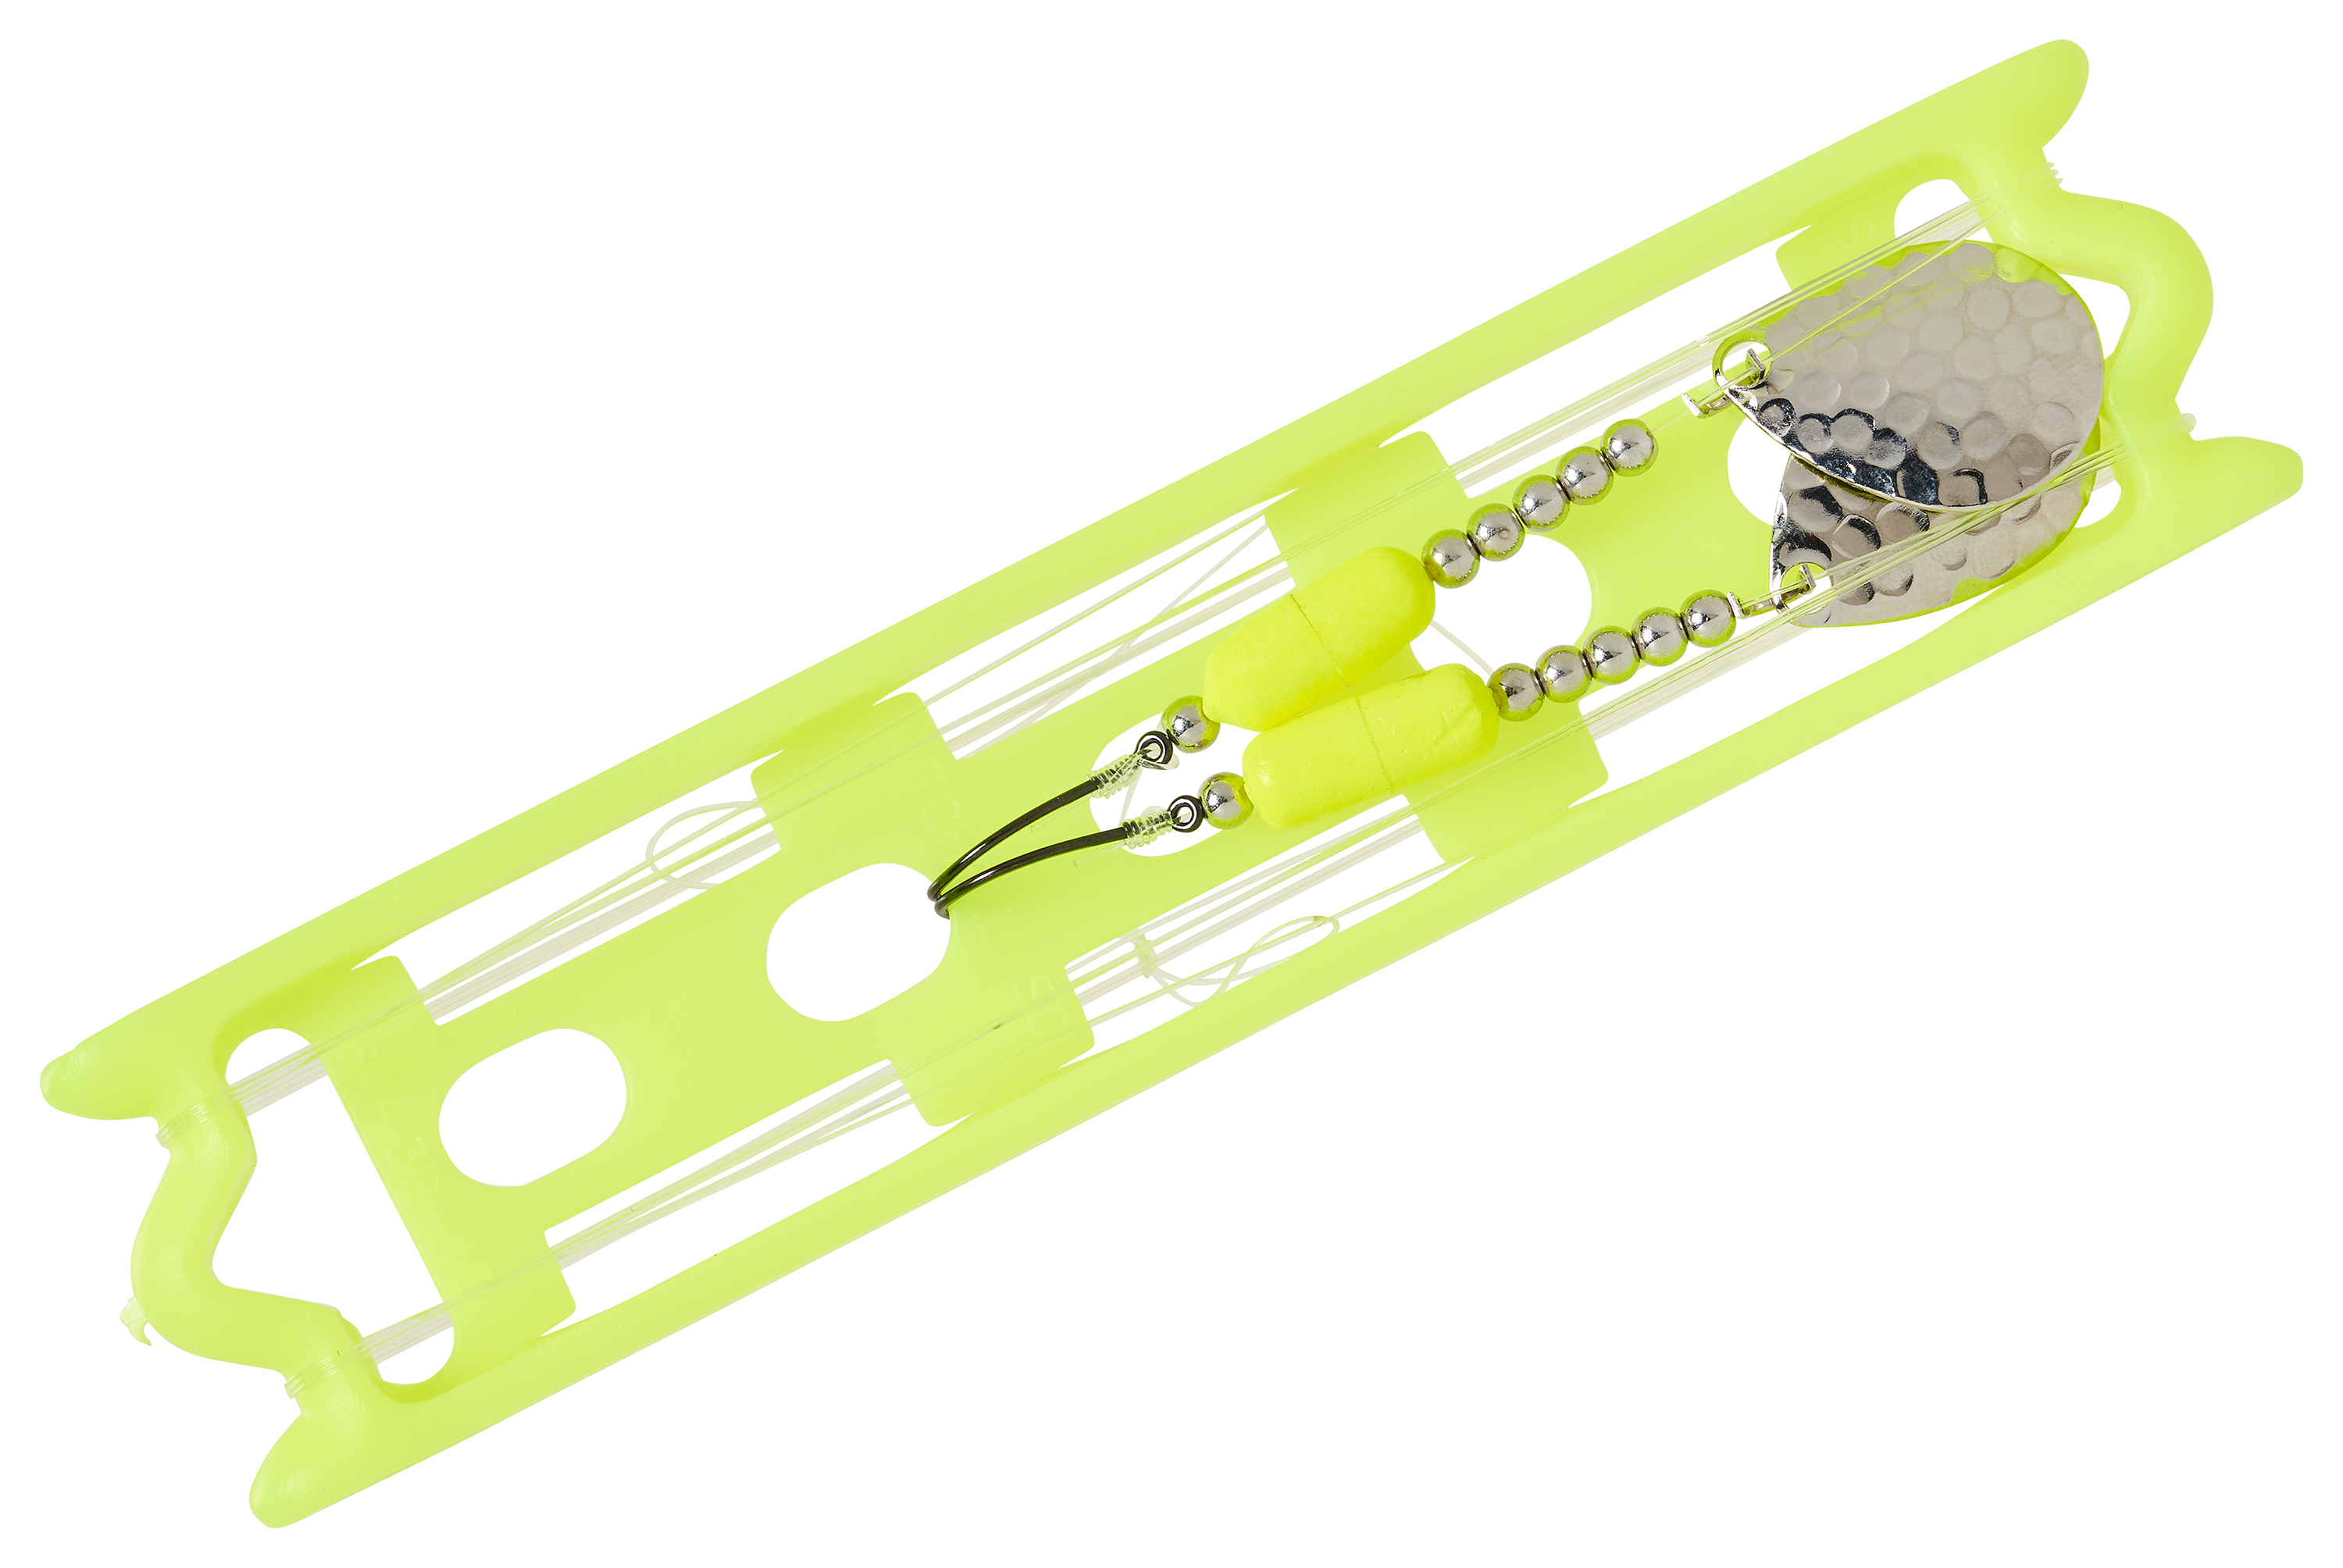 Bass Pro Shops Walleye Angler Indiana Blade Floating Walleye Spinner Harness Rig 2-Pack - 36 - Chartreuse/Lime Scale